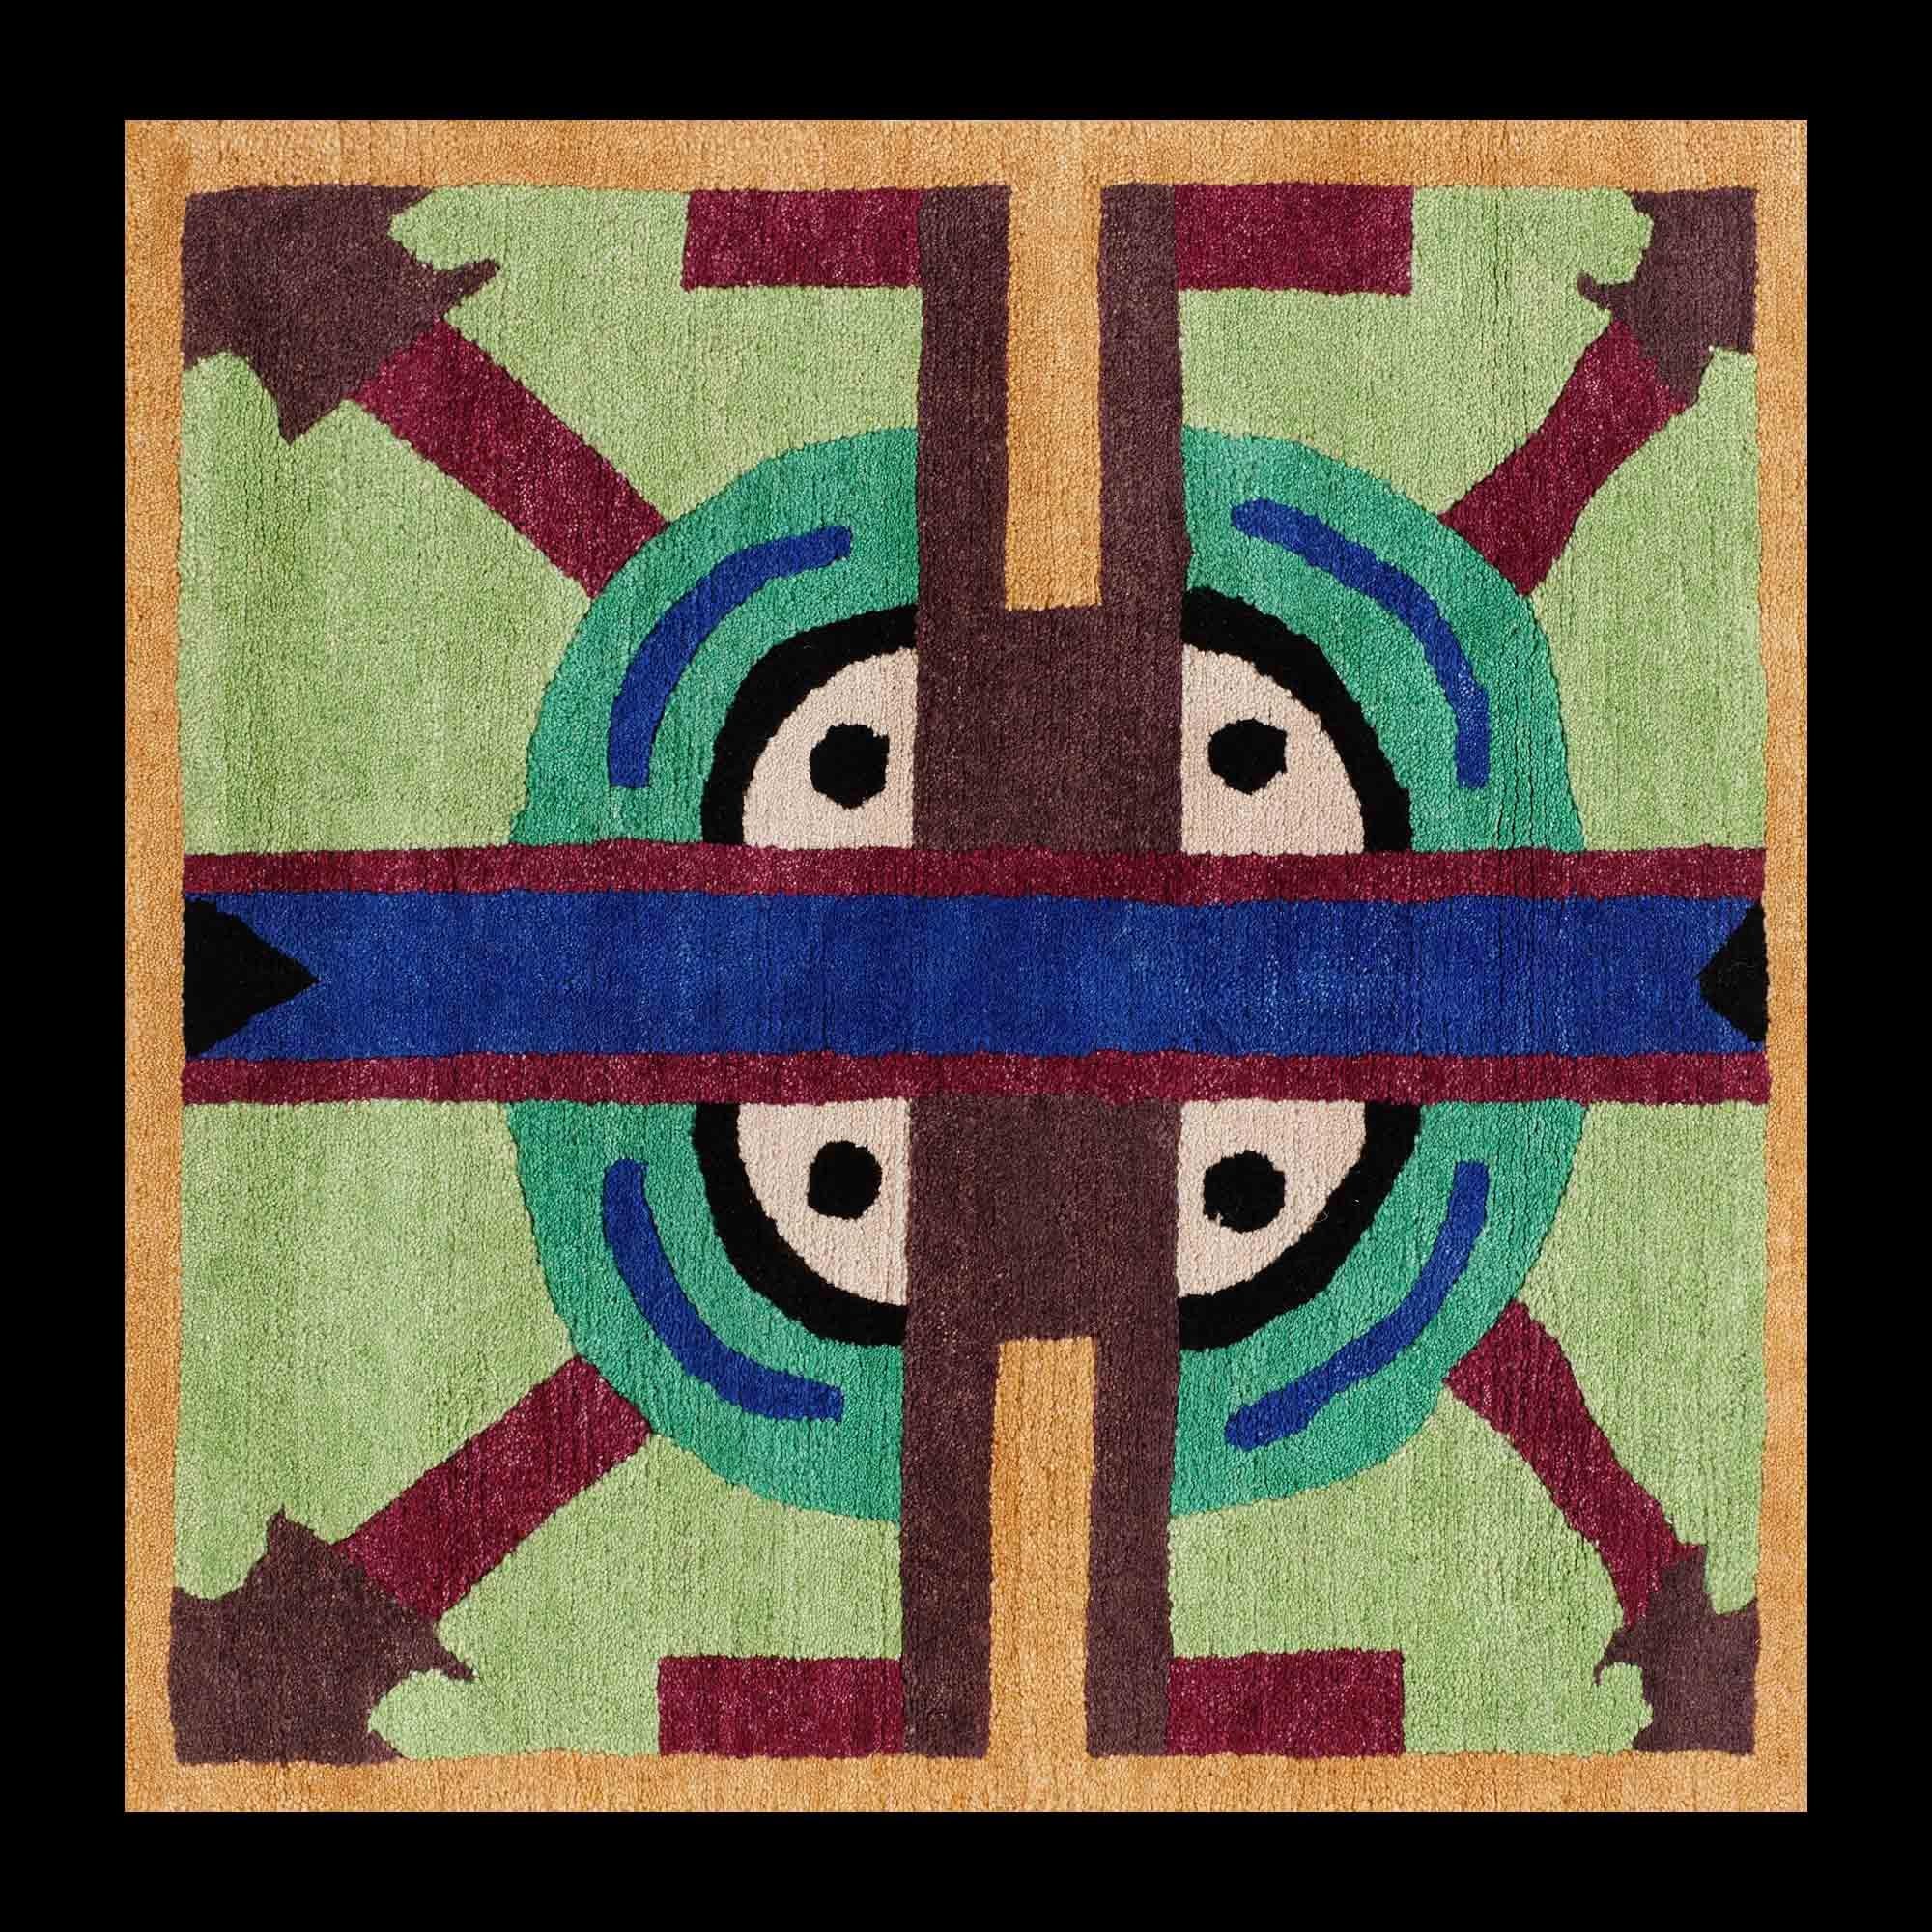 NDP22 woollen carpet by Nathalie Du Pasquier for Post Design collection/Memphis

A woollen carpet handcrafted by different Nepalese artisans. Made in a limited edition of 36 signed, numbered examples.

As the carpet is made by hand, there are